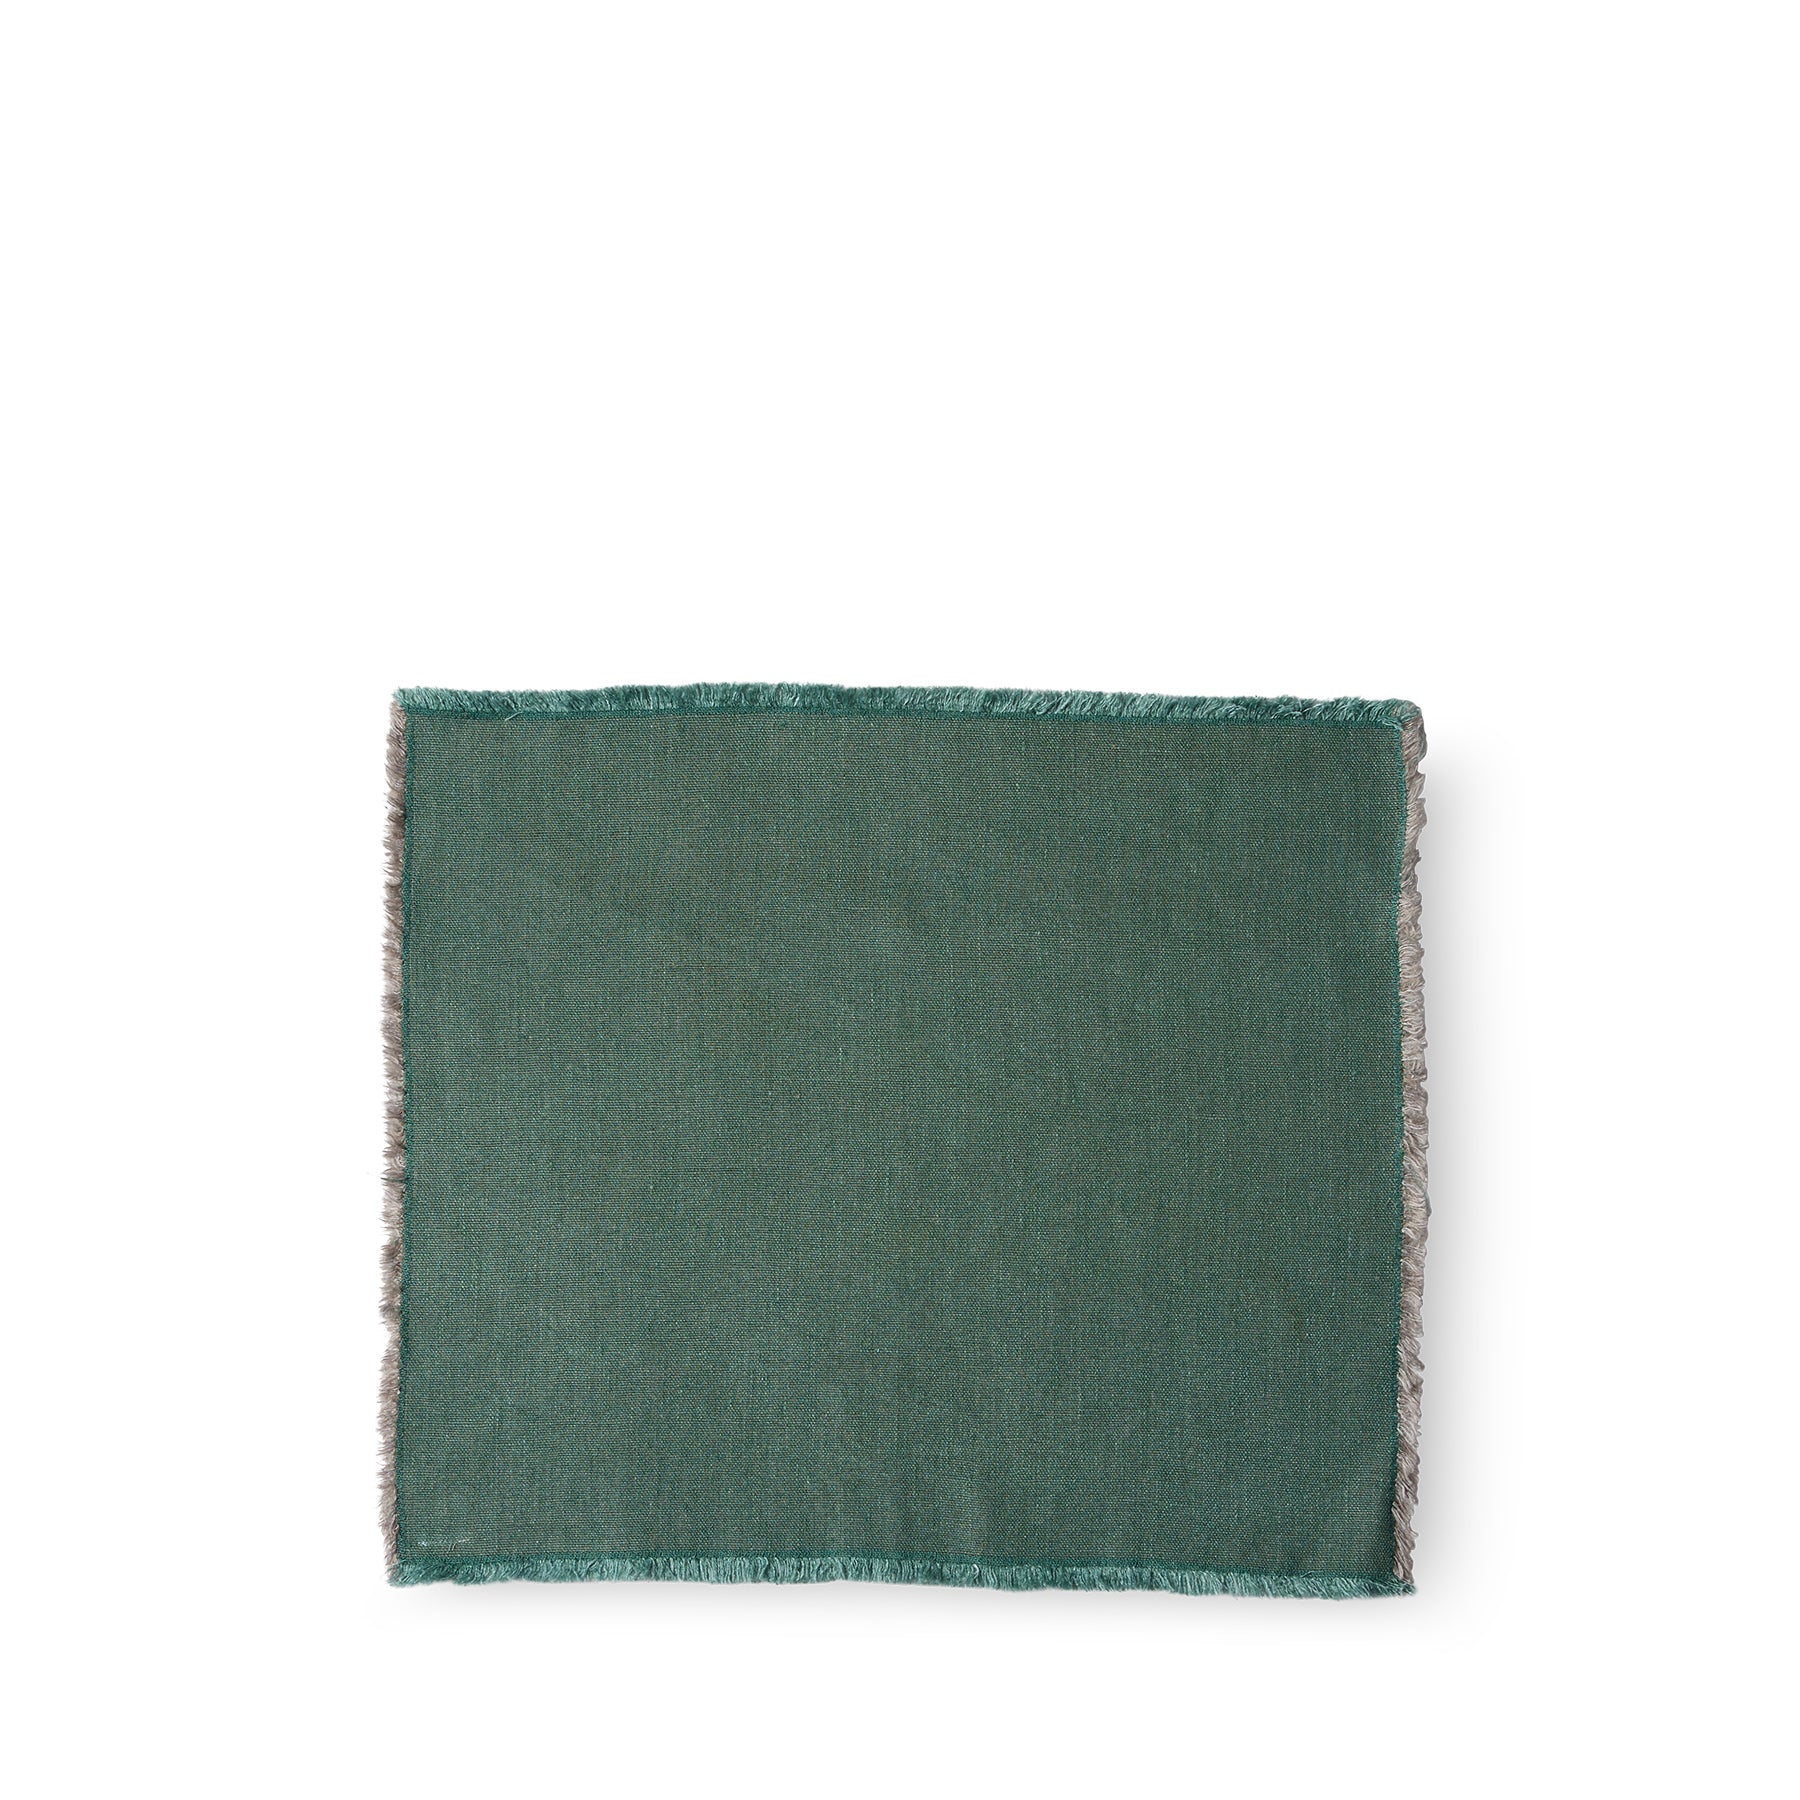 Hopsack Placemat in Slate Green (Set of 2) Zoom Image 1